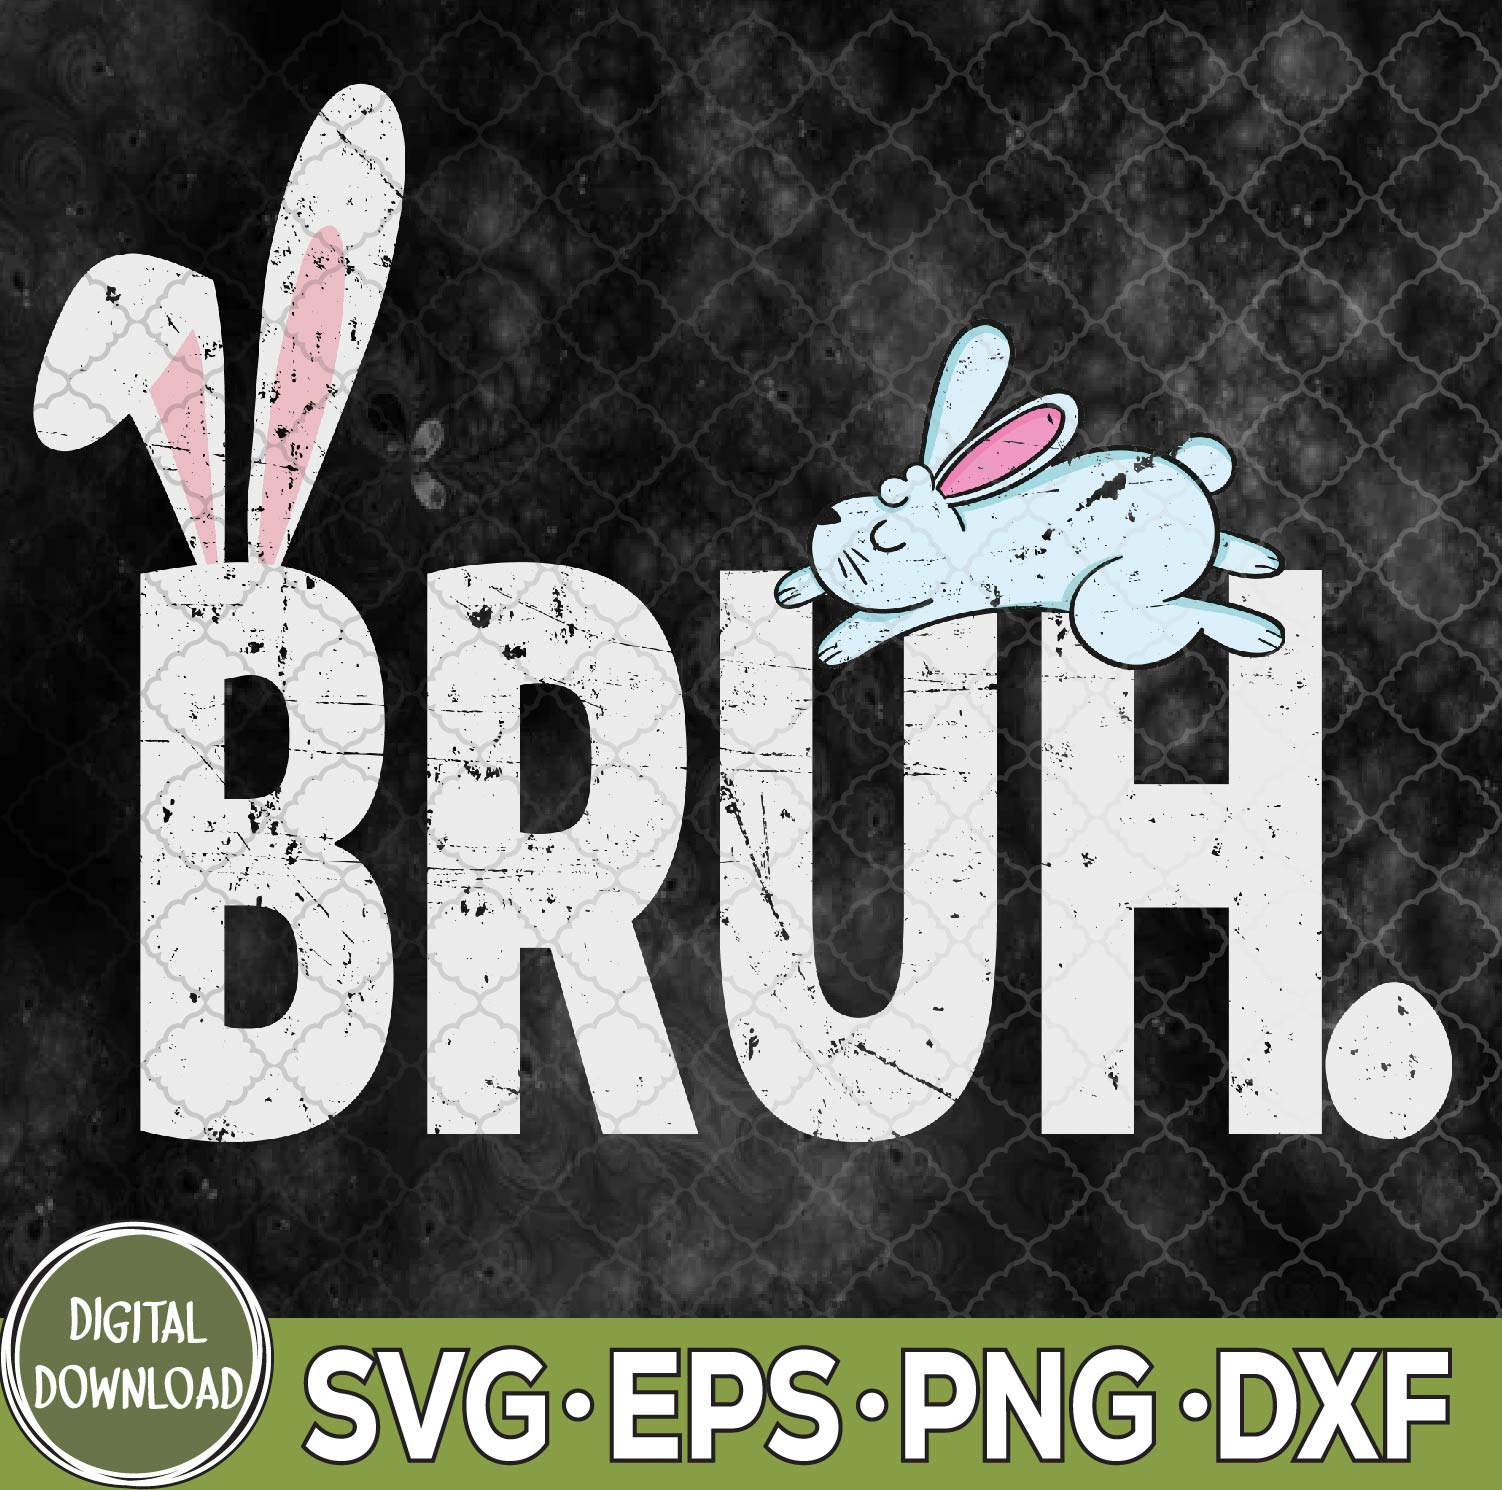 WTMNEW9file 09 96 Cute Bruh Easter Bunny Svg, Funny Easter Svg, Bunny Rabbit Easter Svg, Eps, Png, Dxf